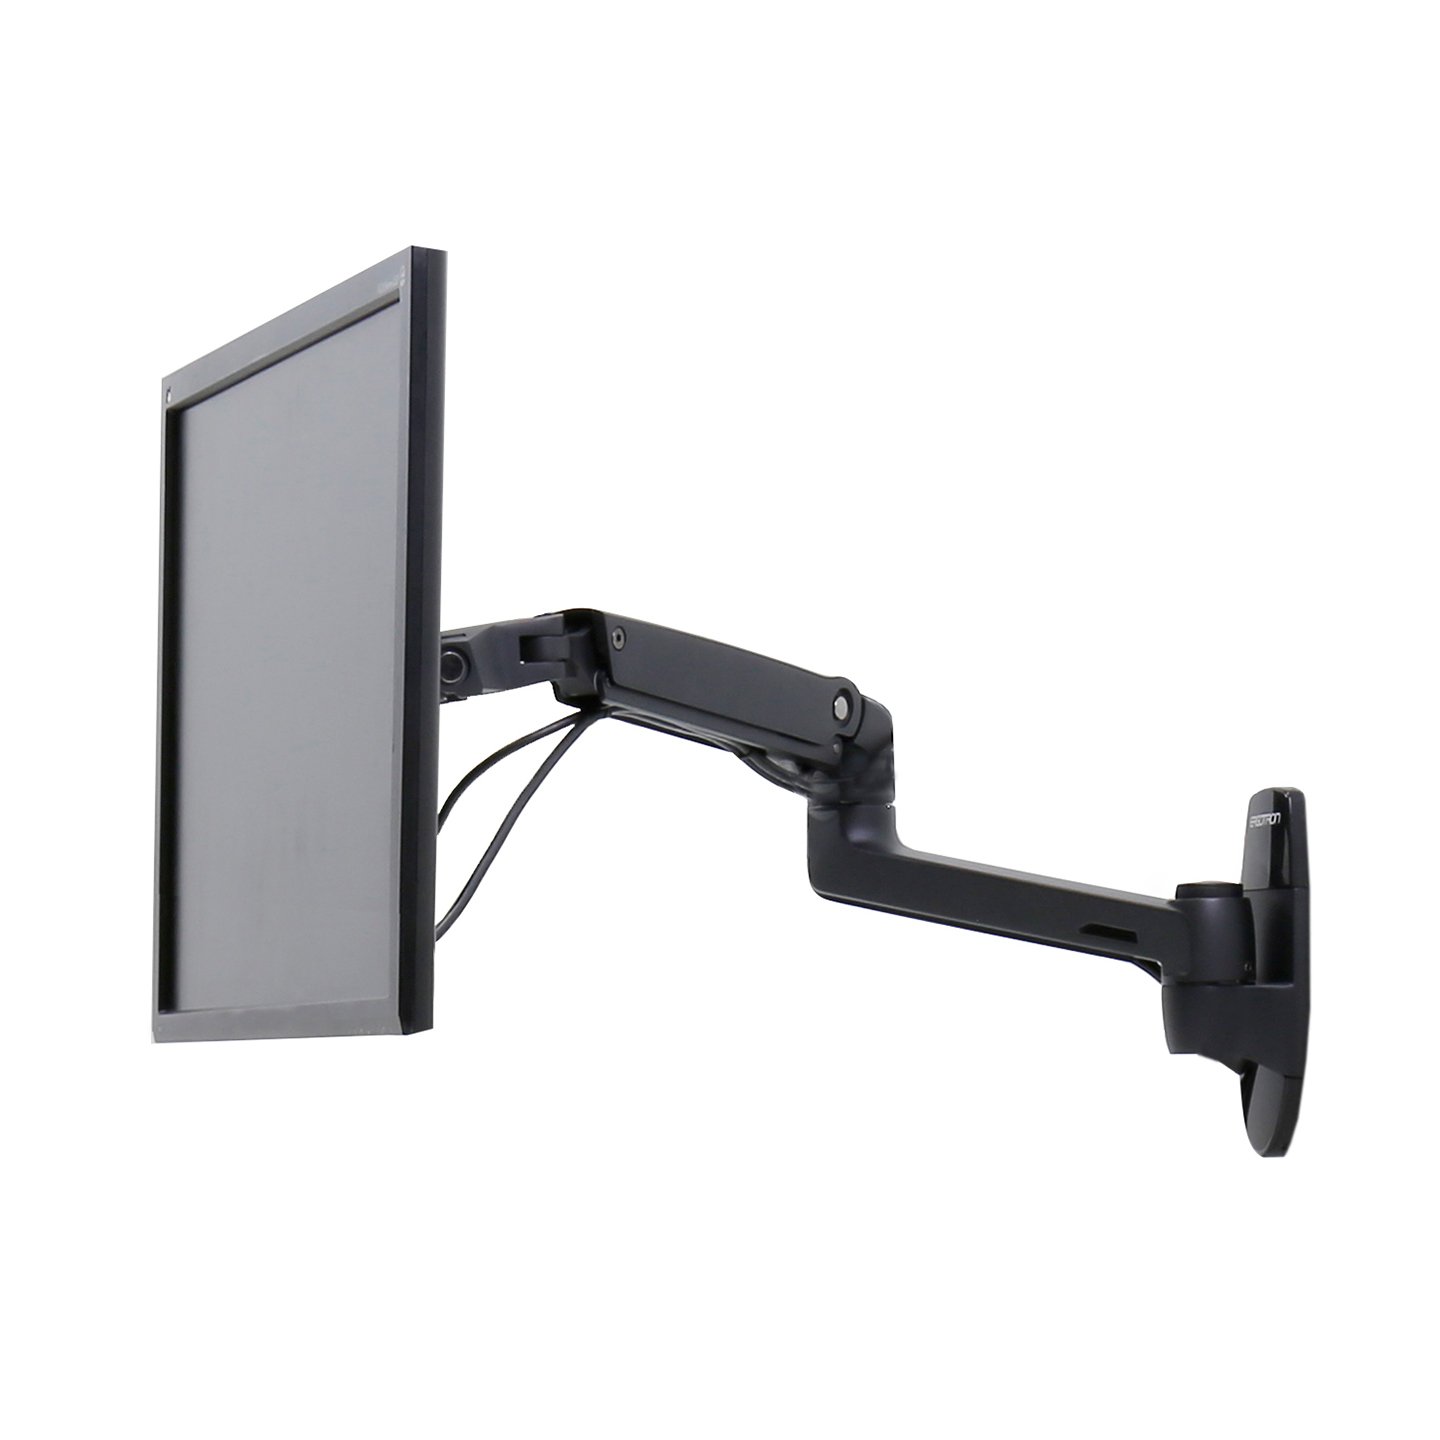 Haworth LX Wall Monitor Arm with range of motion arms and in a black cover with cable hiders